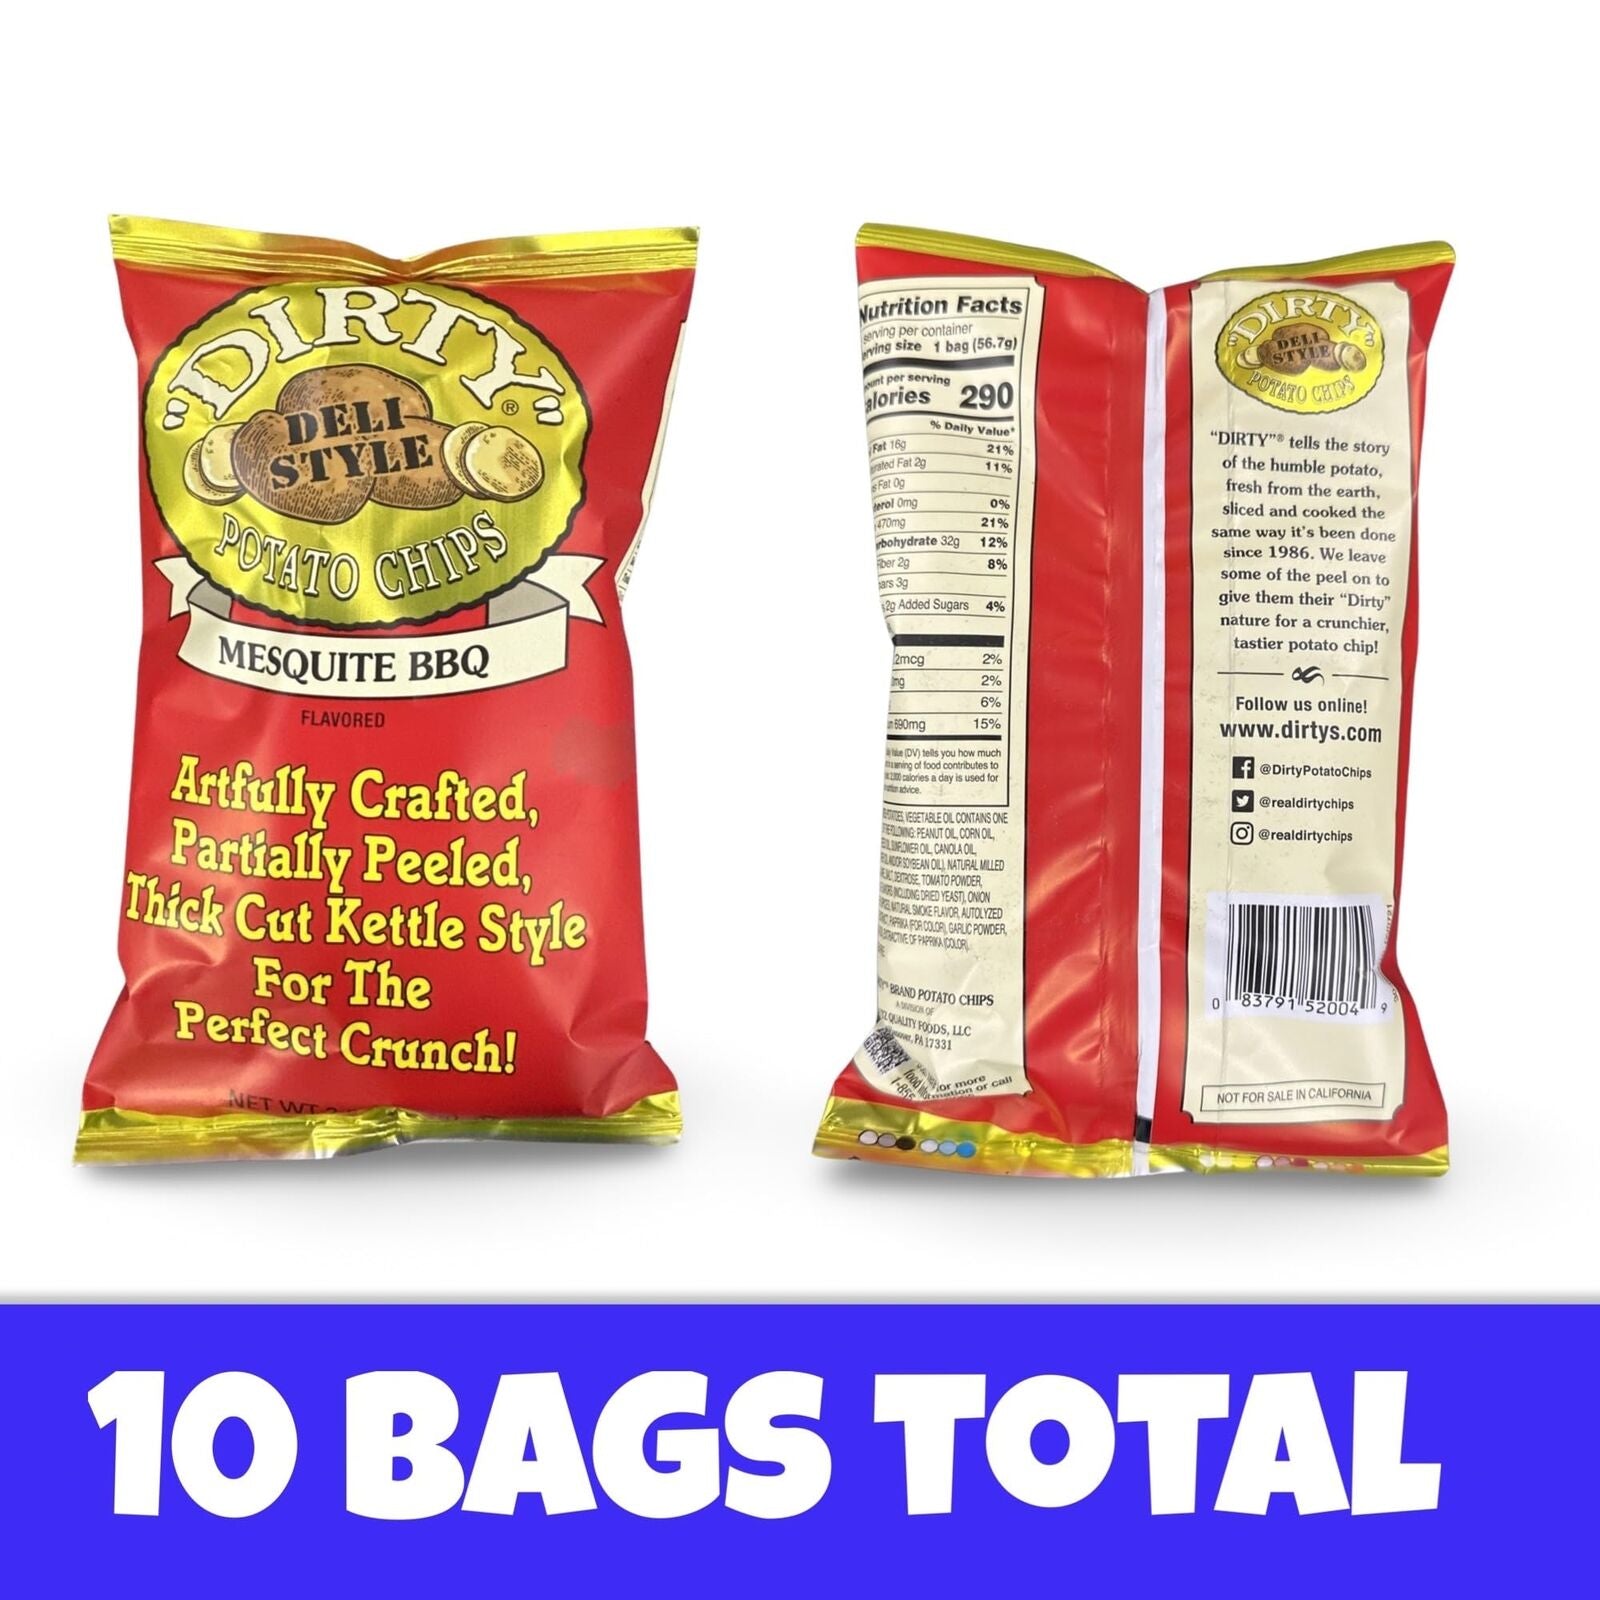 Deli Style Potato Chips Value Pack | Bundled by Tribeca Curations, Mesquite